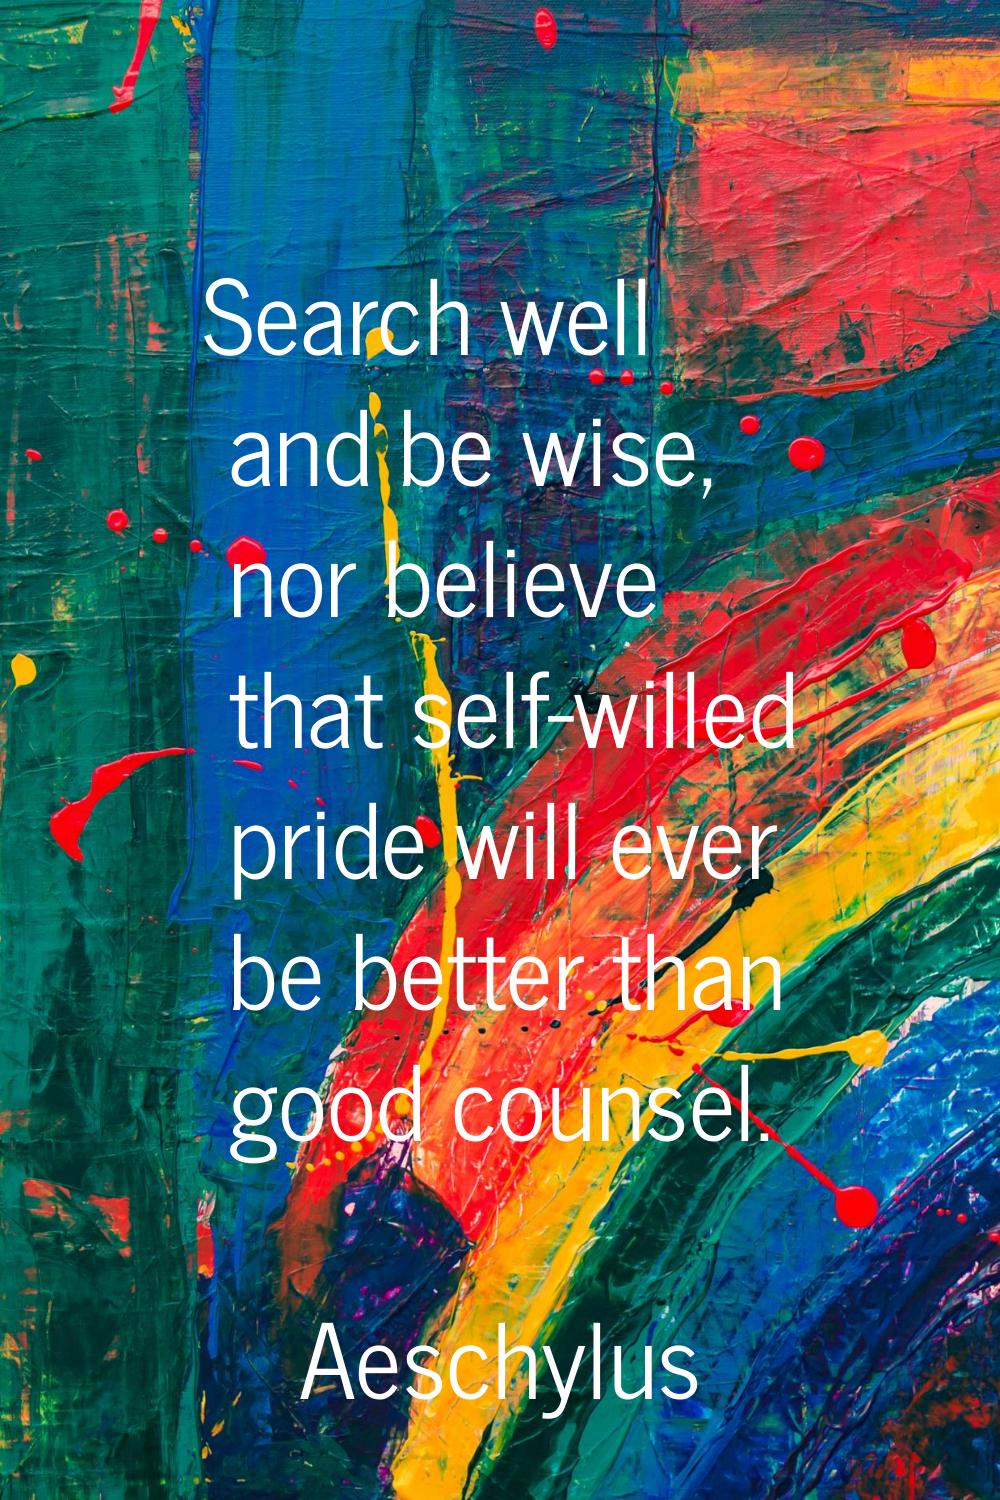 Search well and be wise, nor believe that self-willed pride will ever be better than good counsel.